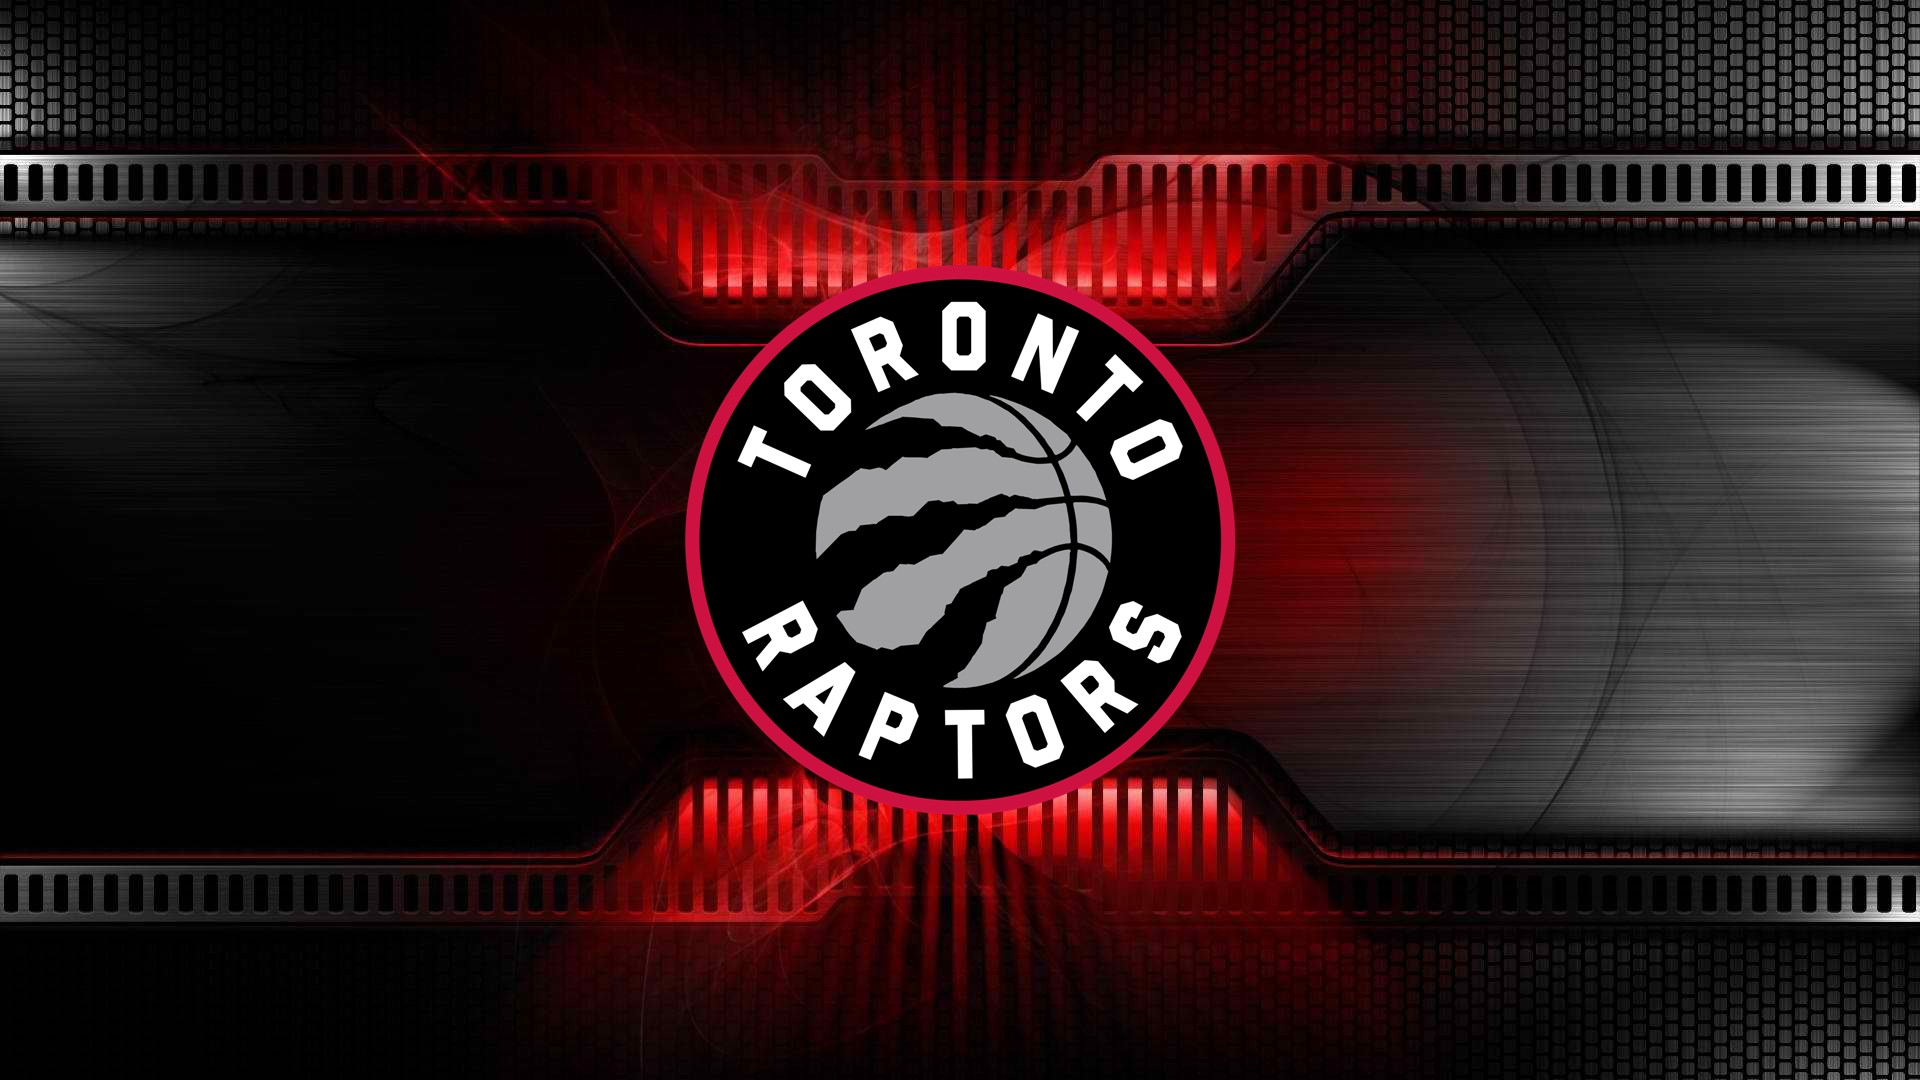 NBA Raptors Wallpaper For Mac Backgrounds with image dimensions 1920x1080 pixel. You can make this wallpaper for your Desktop Computer Backgrounds, Windows or Mac Screensavers, iPhone Lock screen, Tablet or Android and another Mobile Phone device